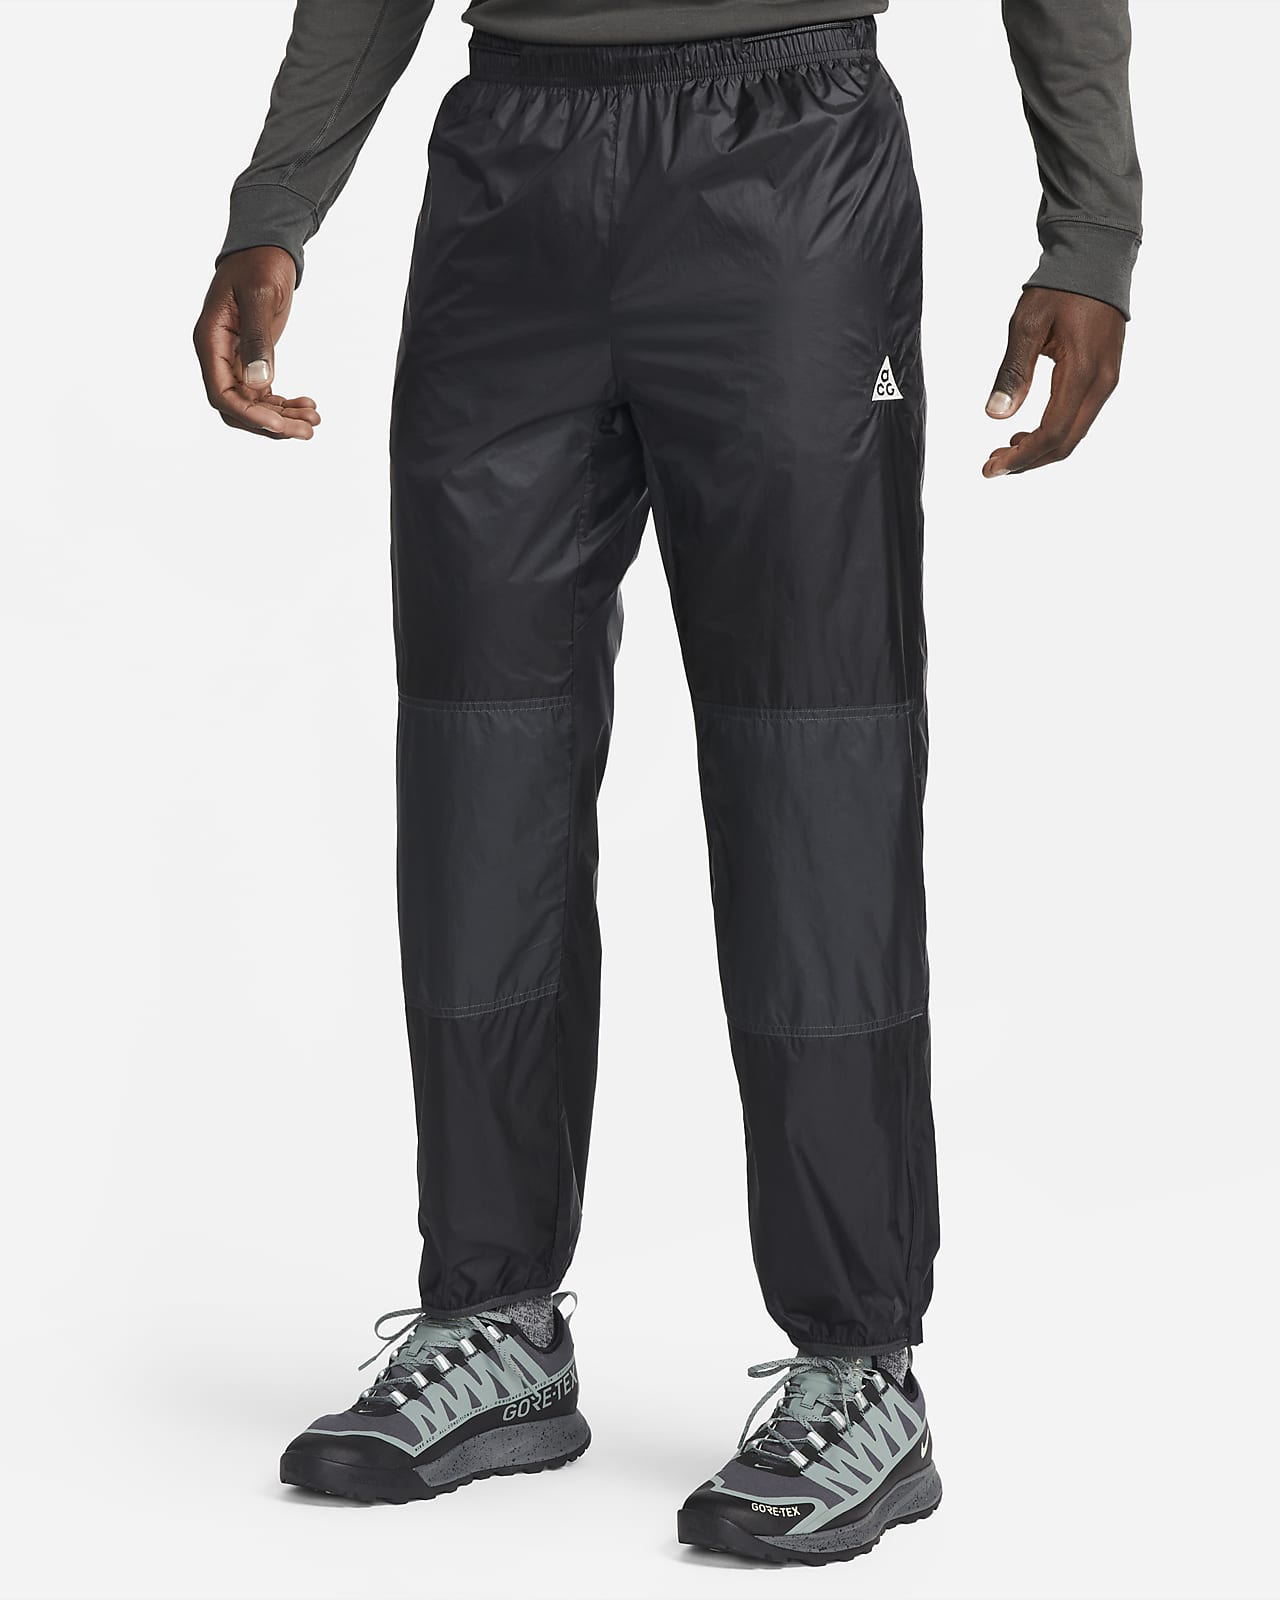 Nike ACG "Cinder Cone" Men's Windshell Trousers